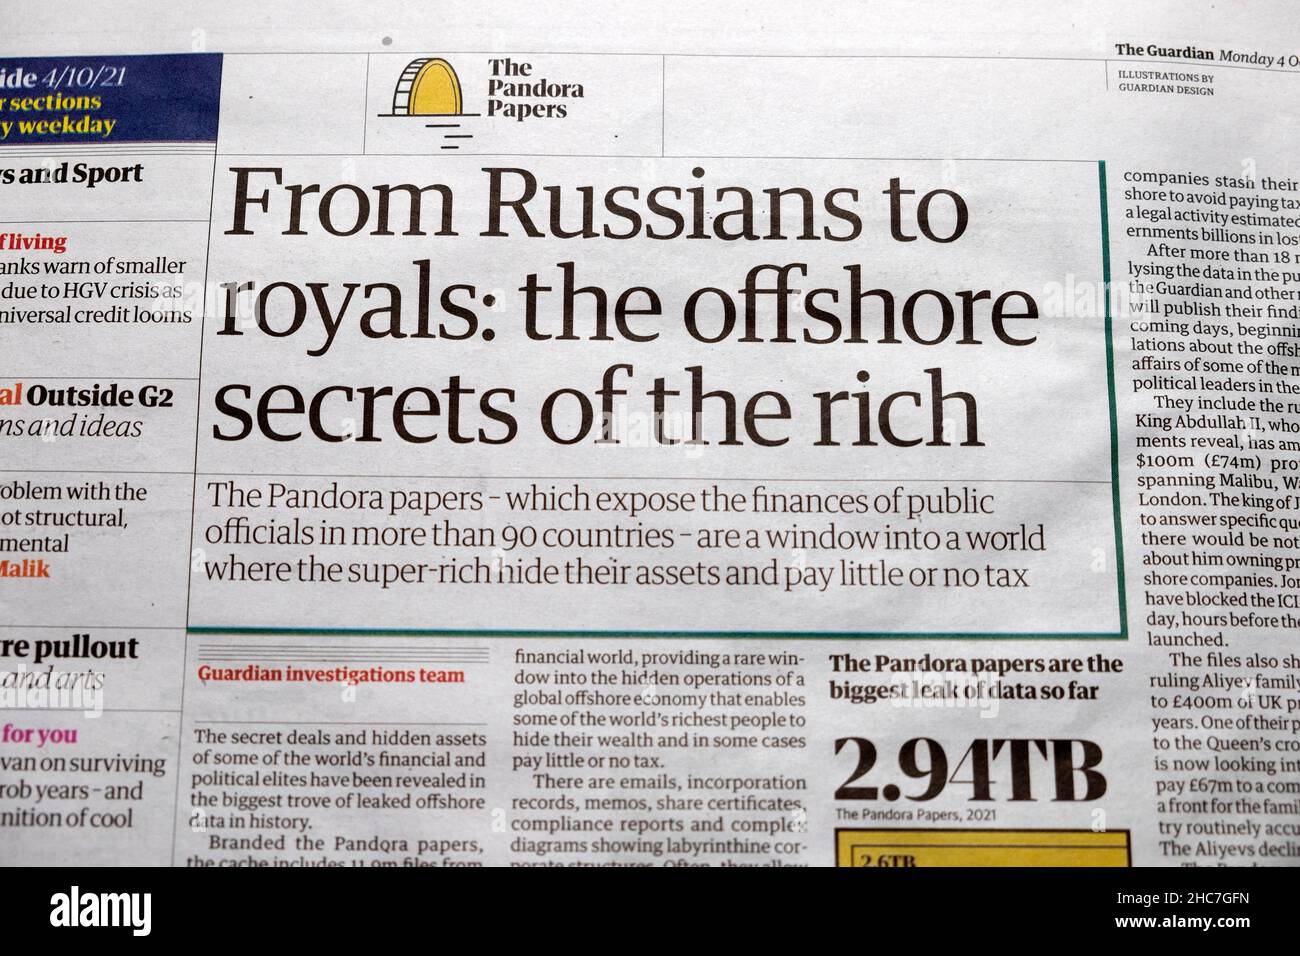 'From Russians to royals: the offshore secrets of the rich' Guardian newspaper headline clipping Pandora Papers 4 October 2021 London England UK Stock Photo